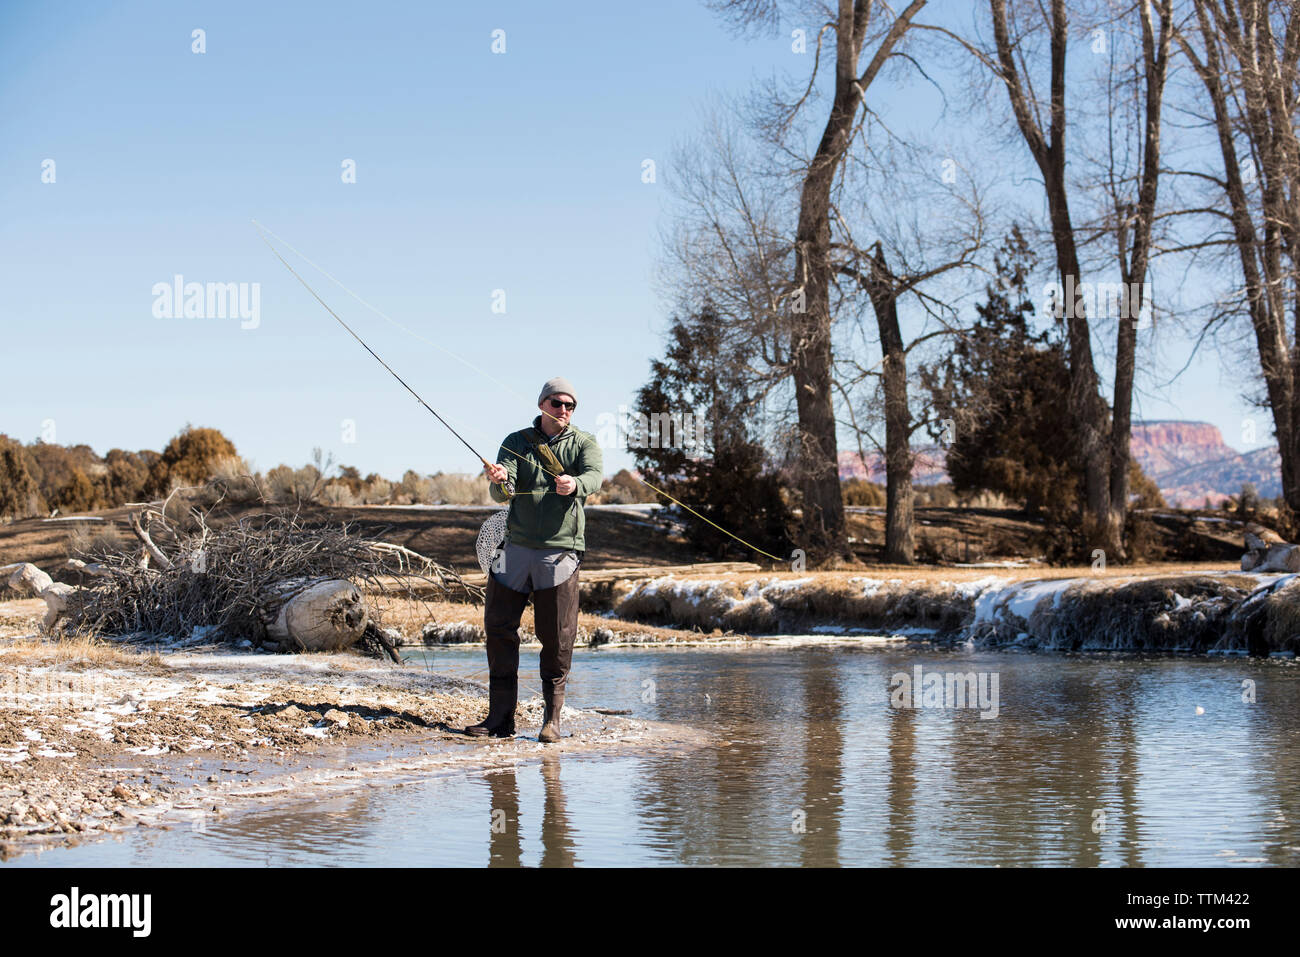 Full length of man fishing in river against clear sky Stock Photo